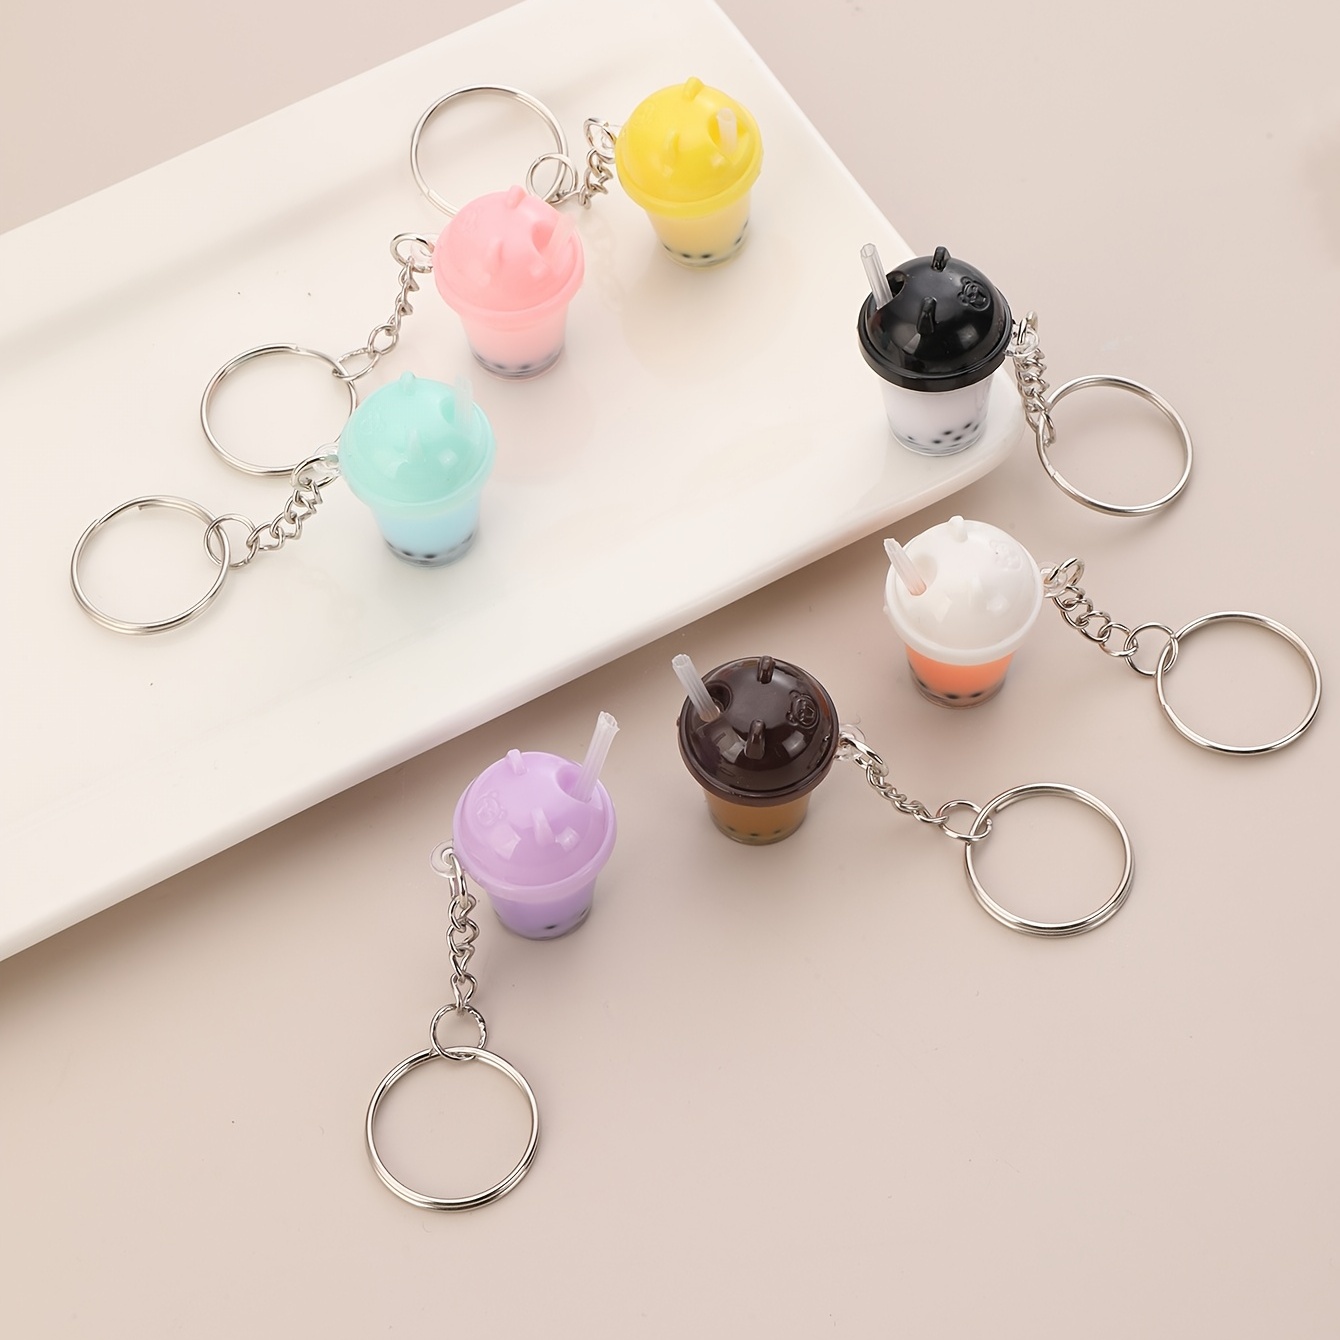 10pcs Cute Transparent Bear Cup Charms Kawaii Juice Cup Pendant DIY Jewelry  Making for Bracelet Necklace Keychain Phone Craft